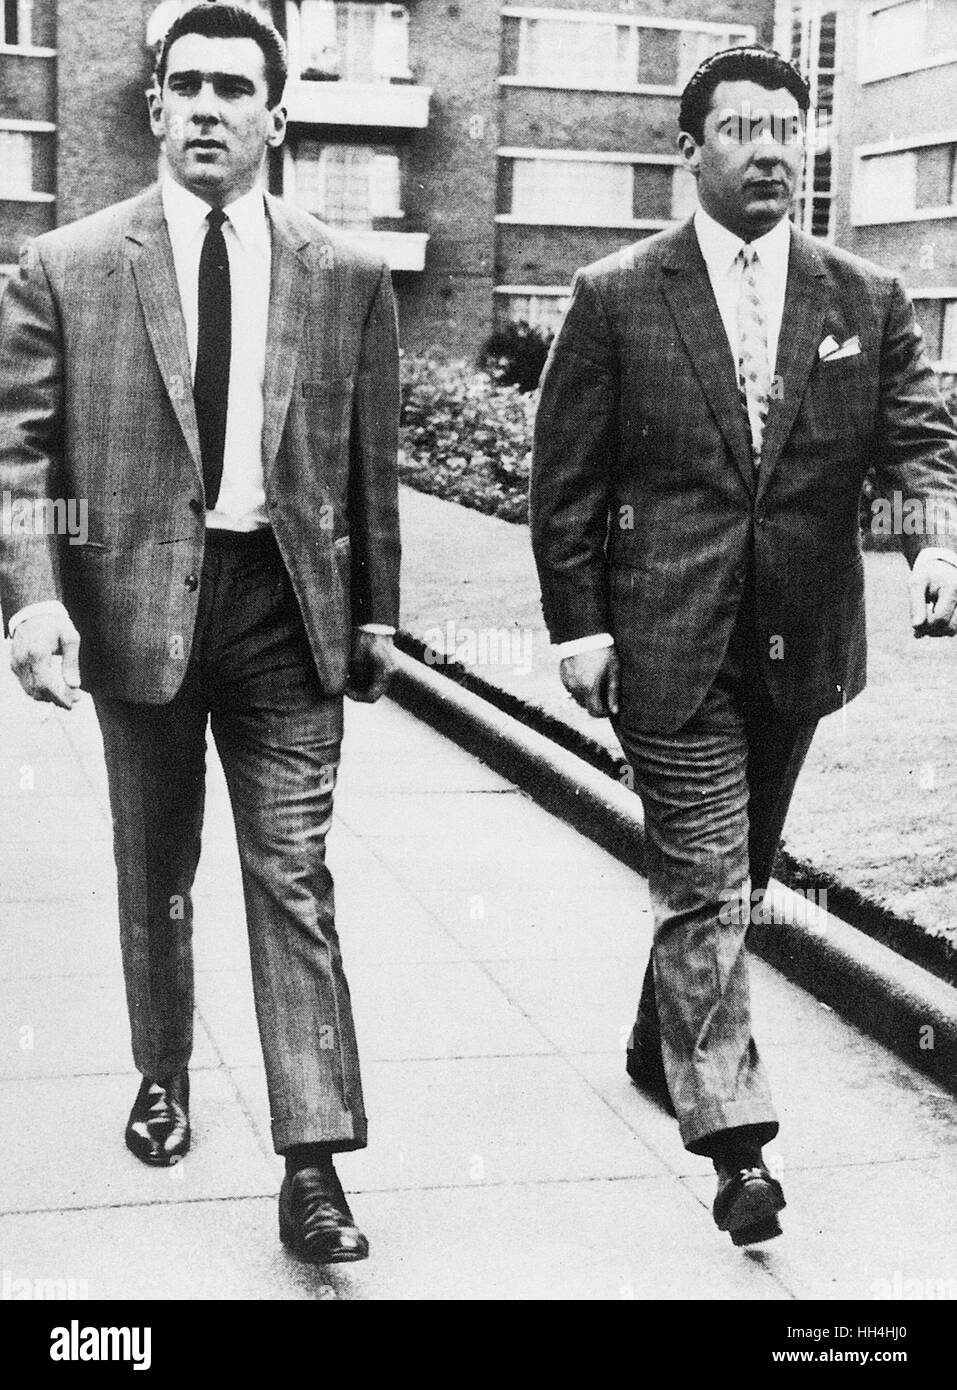 The Kray brothers, Reggie (left) and Ronnie (right), notorious London-based criminals. Stock Photo